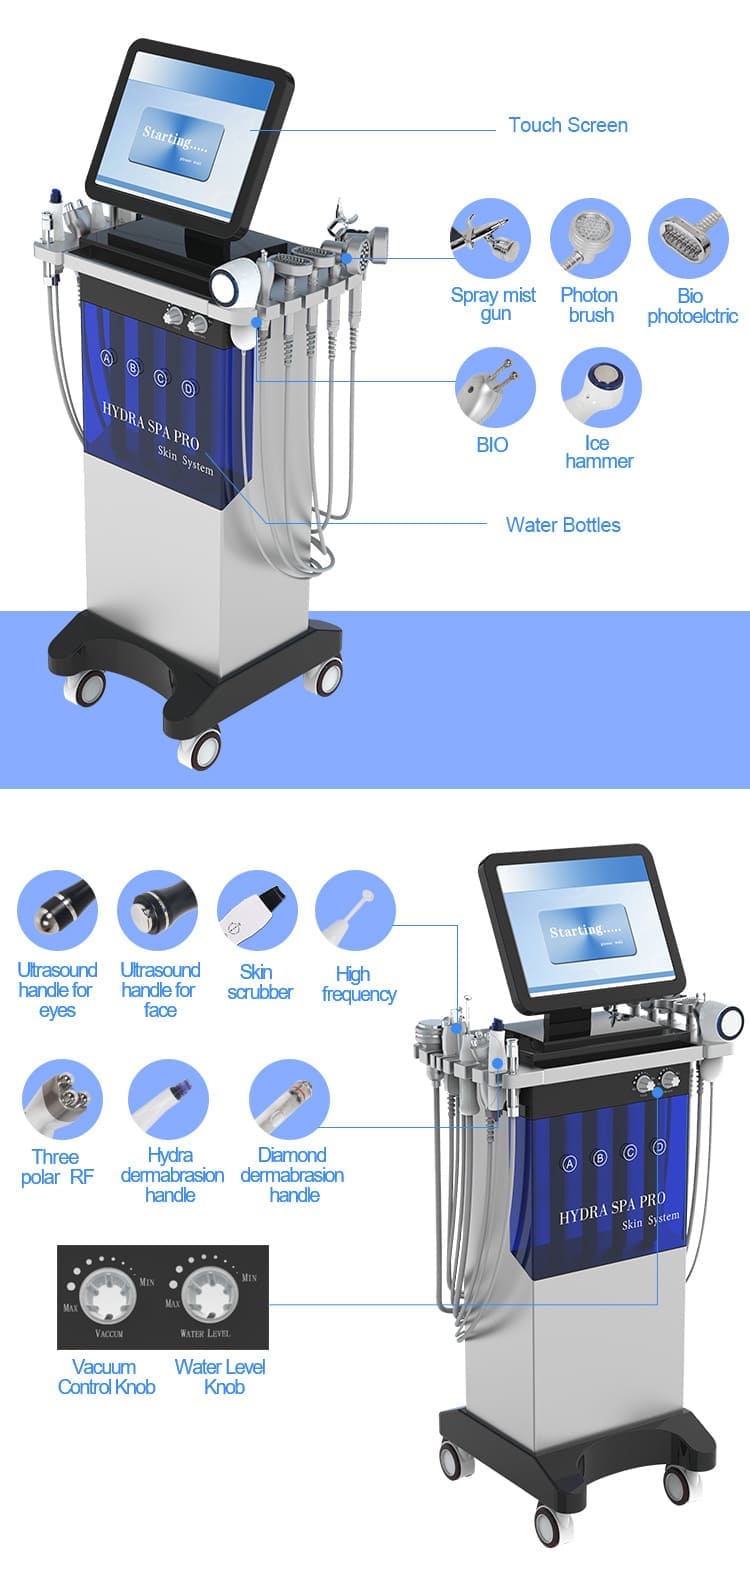 14 In 1 Multifunctional Spa Equipment Hydra Facial Microdermabrasion Oxygen Spray Injector Deep Cleaning Face Lifting Machine On Sale 14 in 1 Hydrafacial Microdermabrasion Machine | Honkay hydrafacial machine price,microdermabrasion machine,hydrafacial machine